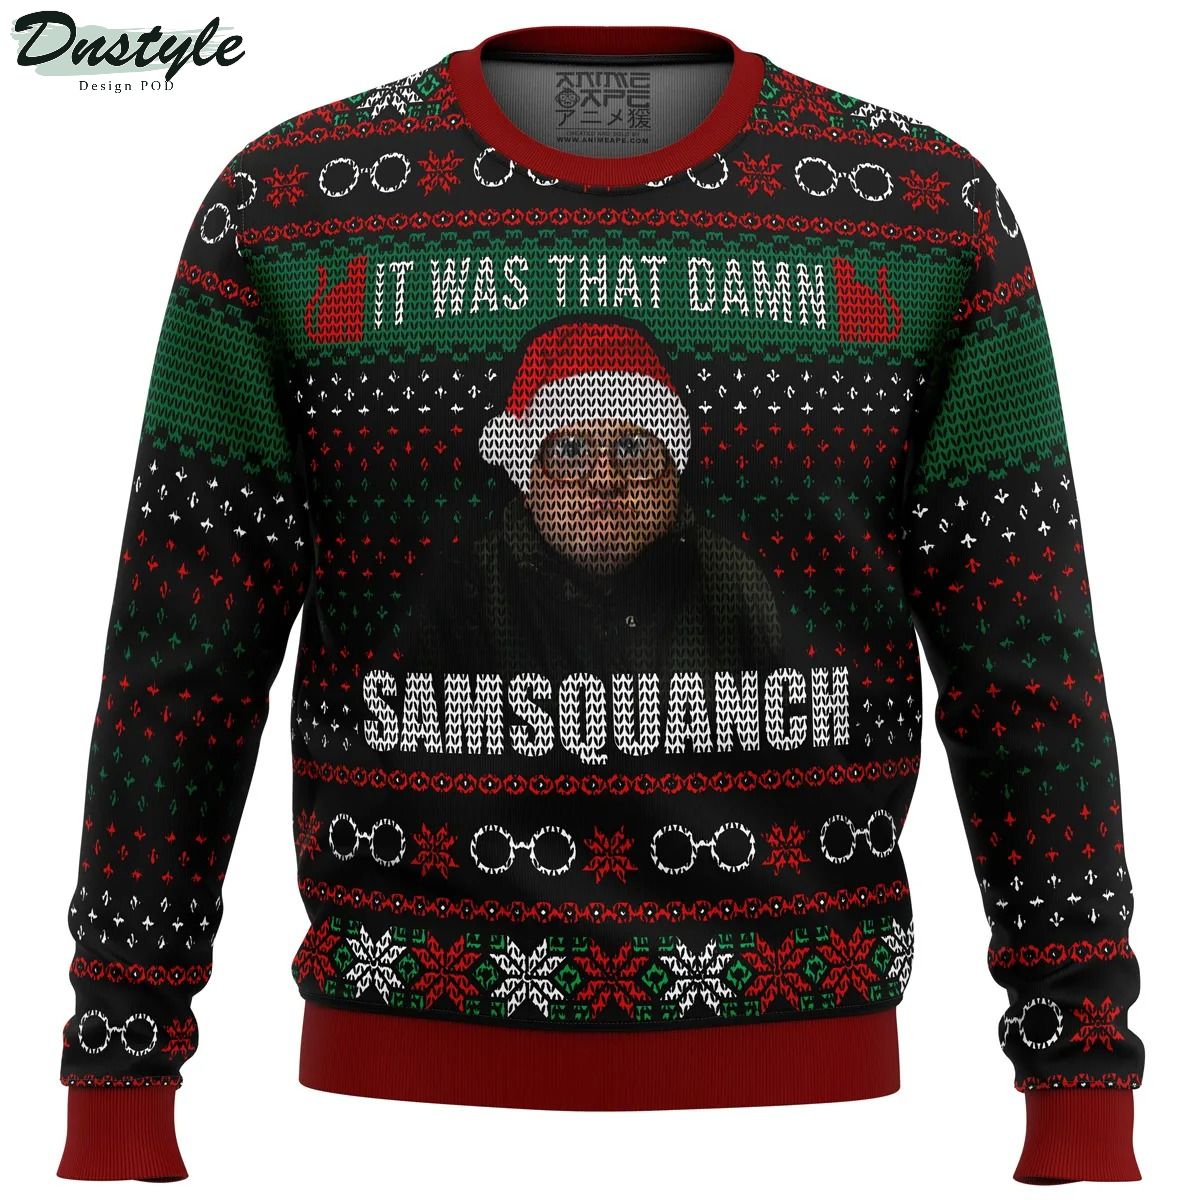 Trailer Park BoySymbol Lelouch Code Geass Ugly Christmas Sweaters Samsquanch Ugly Christmas Sweater